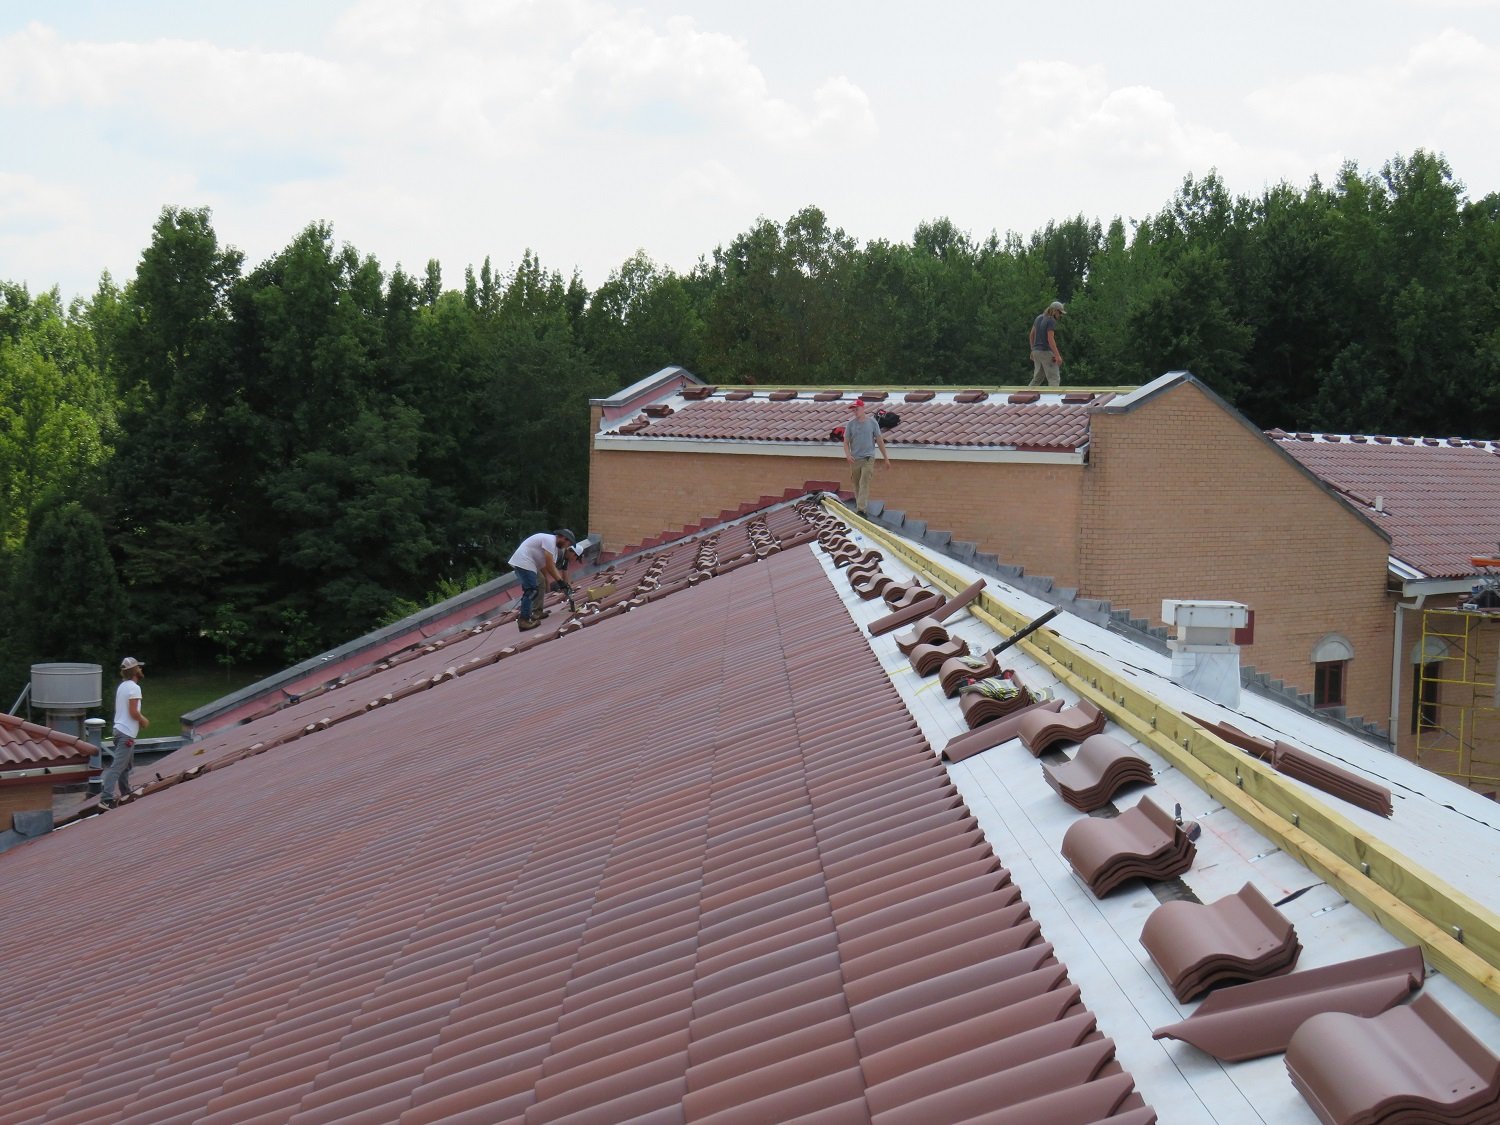  August 5 - it’s really starting to look like a clay tile roof 